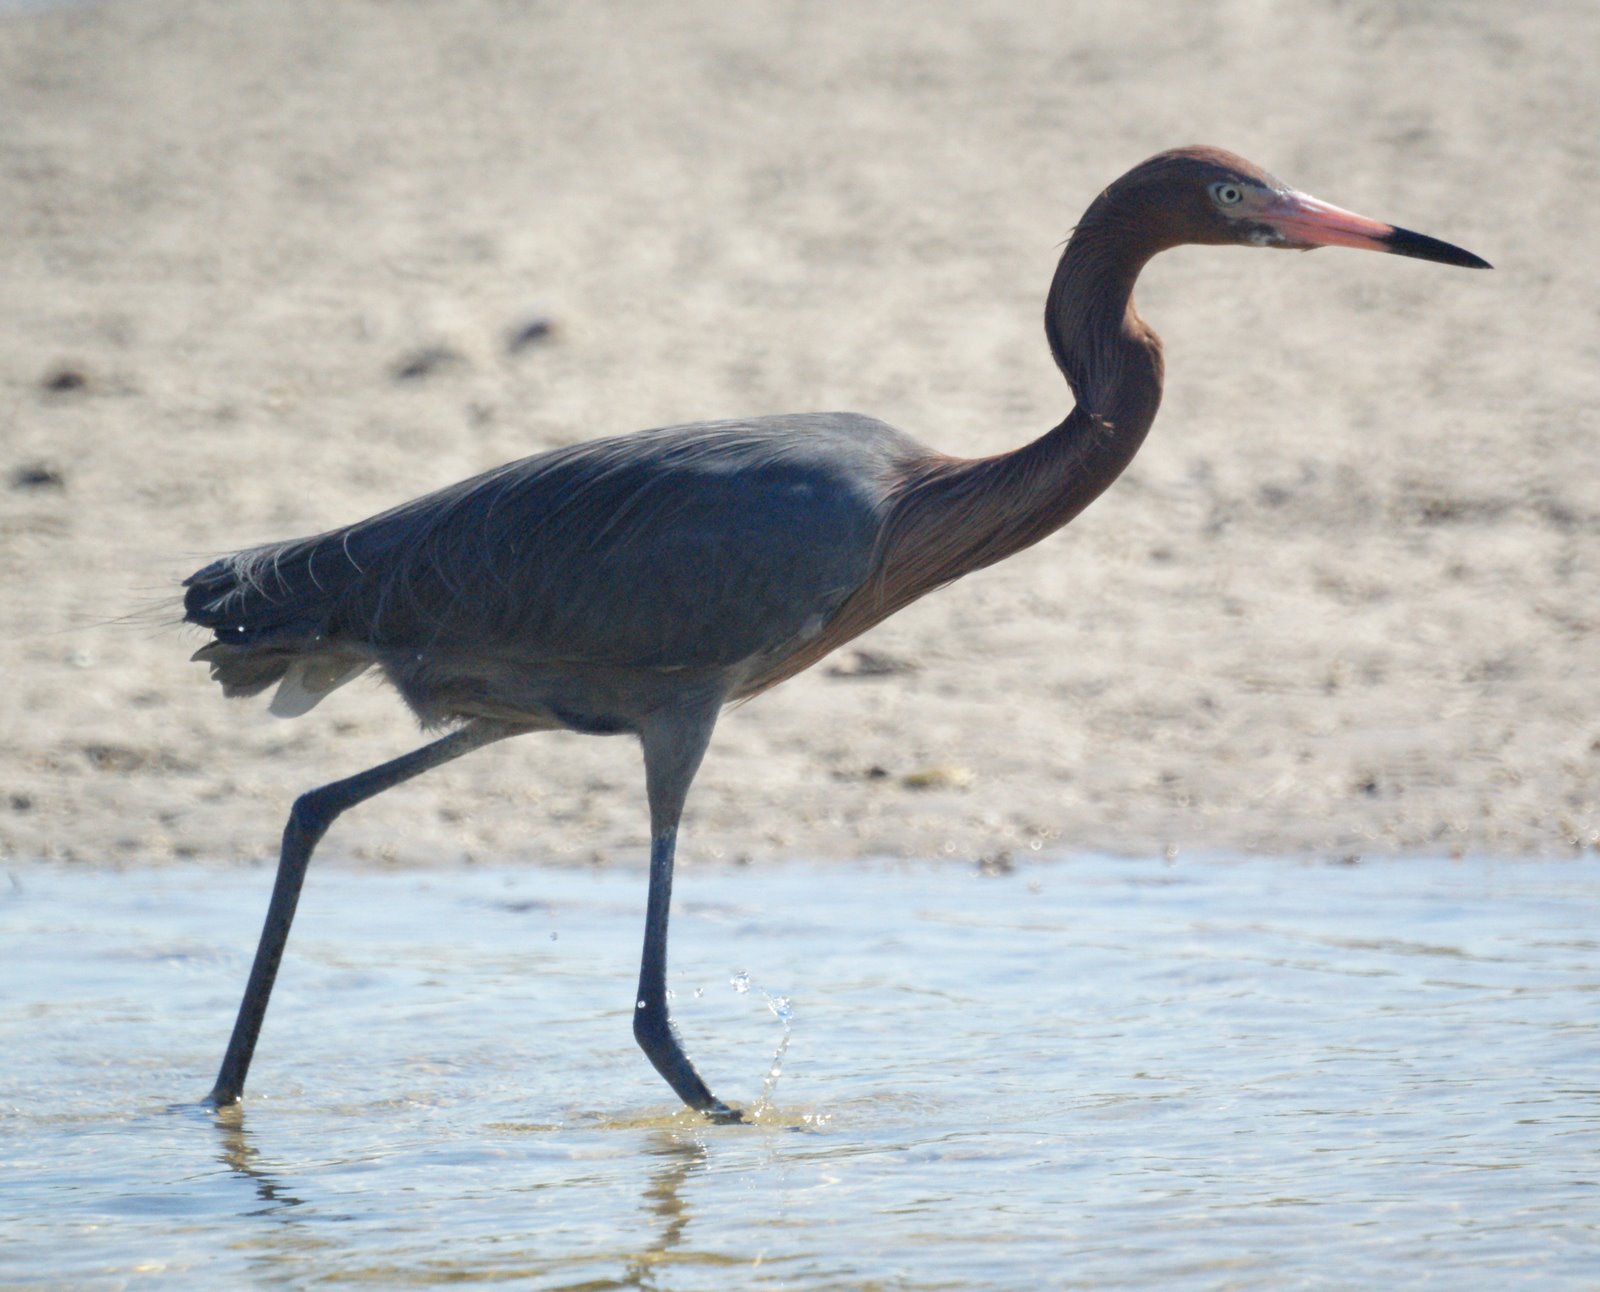 miketes: We really like the reddish egret